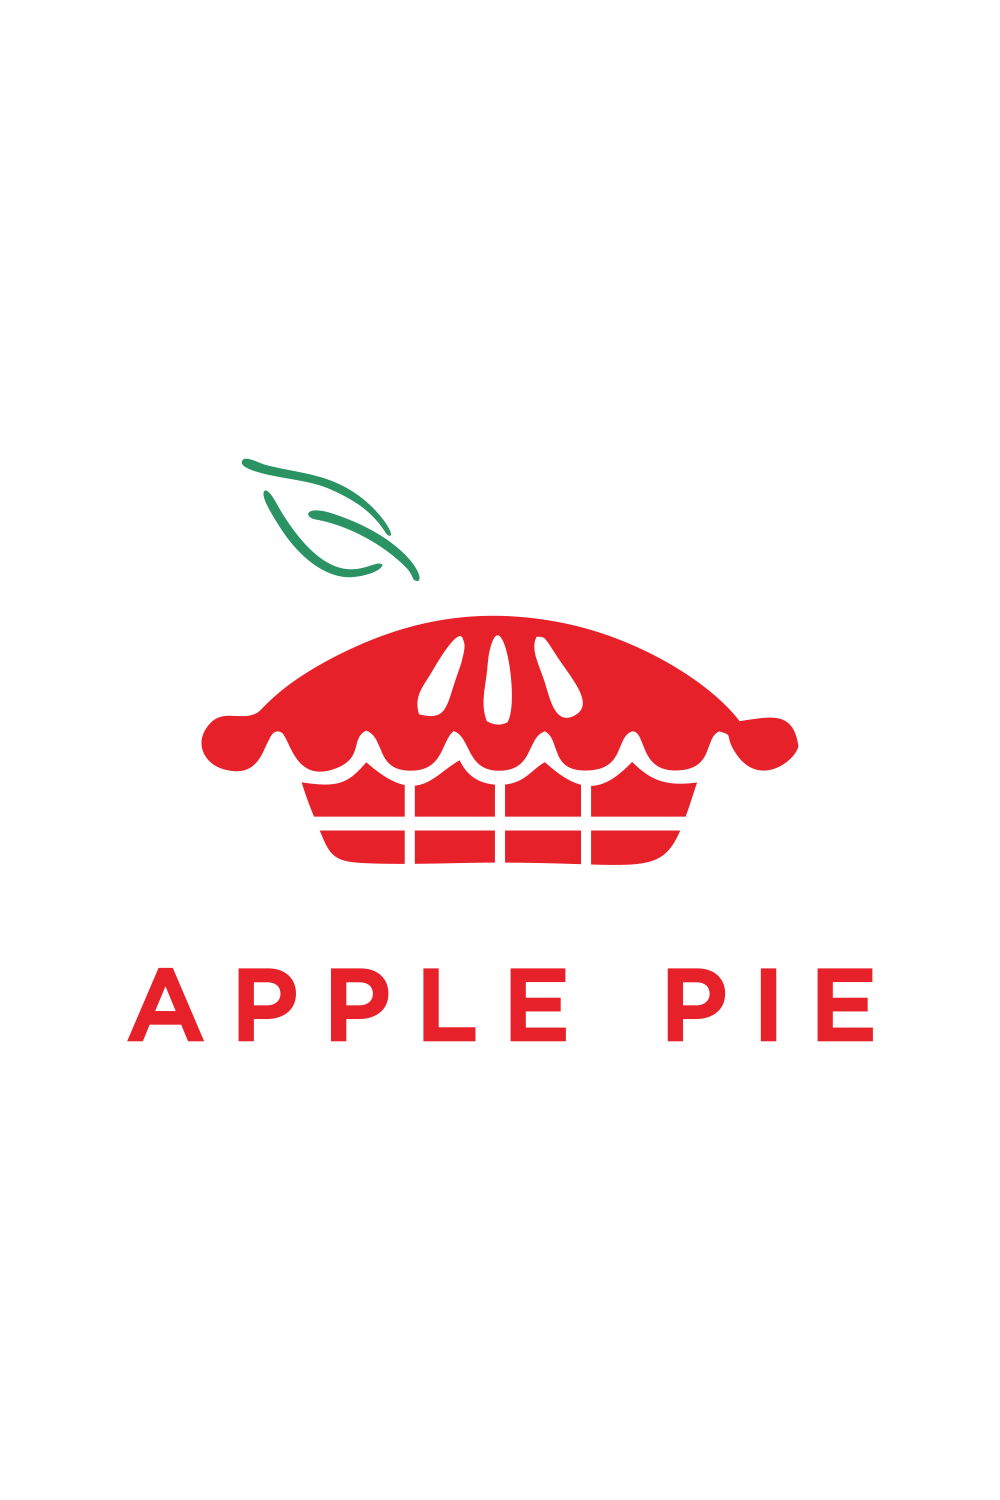 a dish made from a pastry dish filled with various sweet ingredients such as apples logo tamplate pinterest preview image.